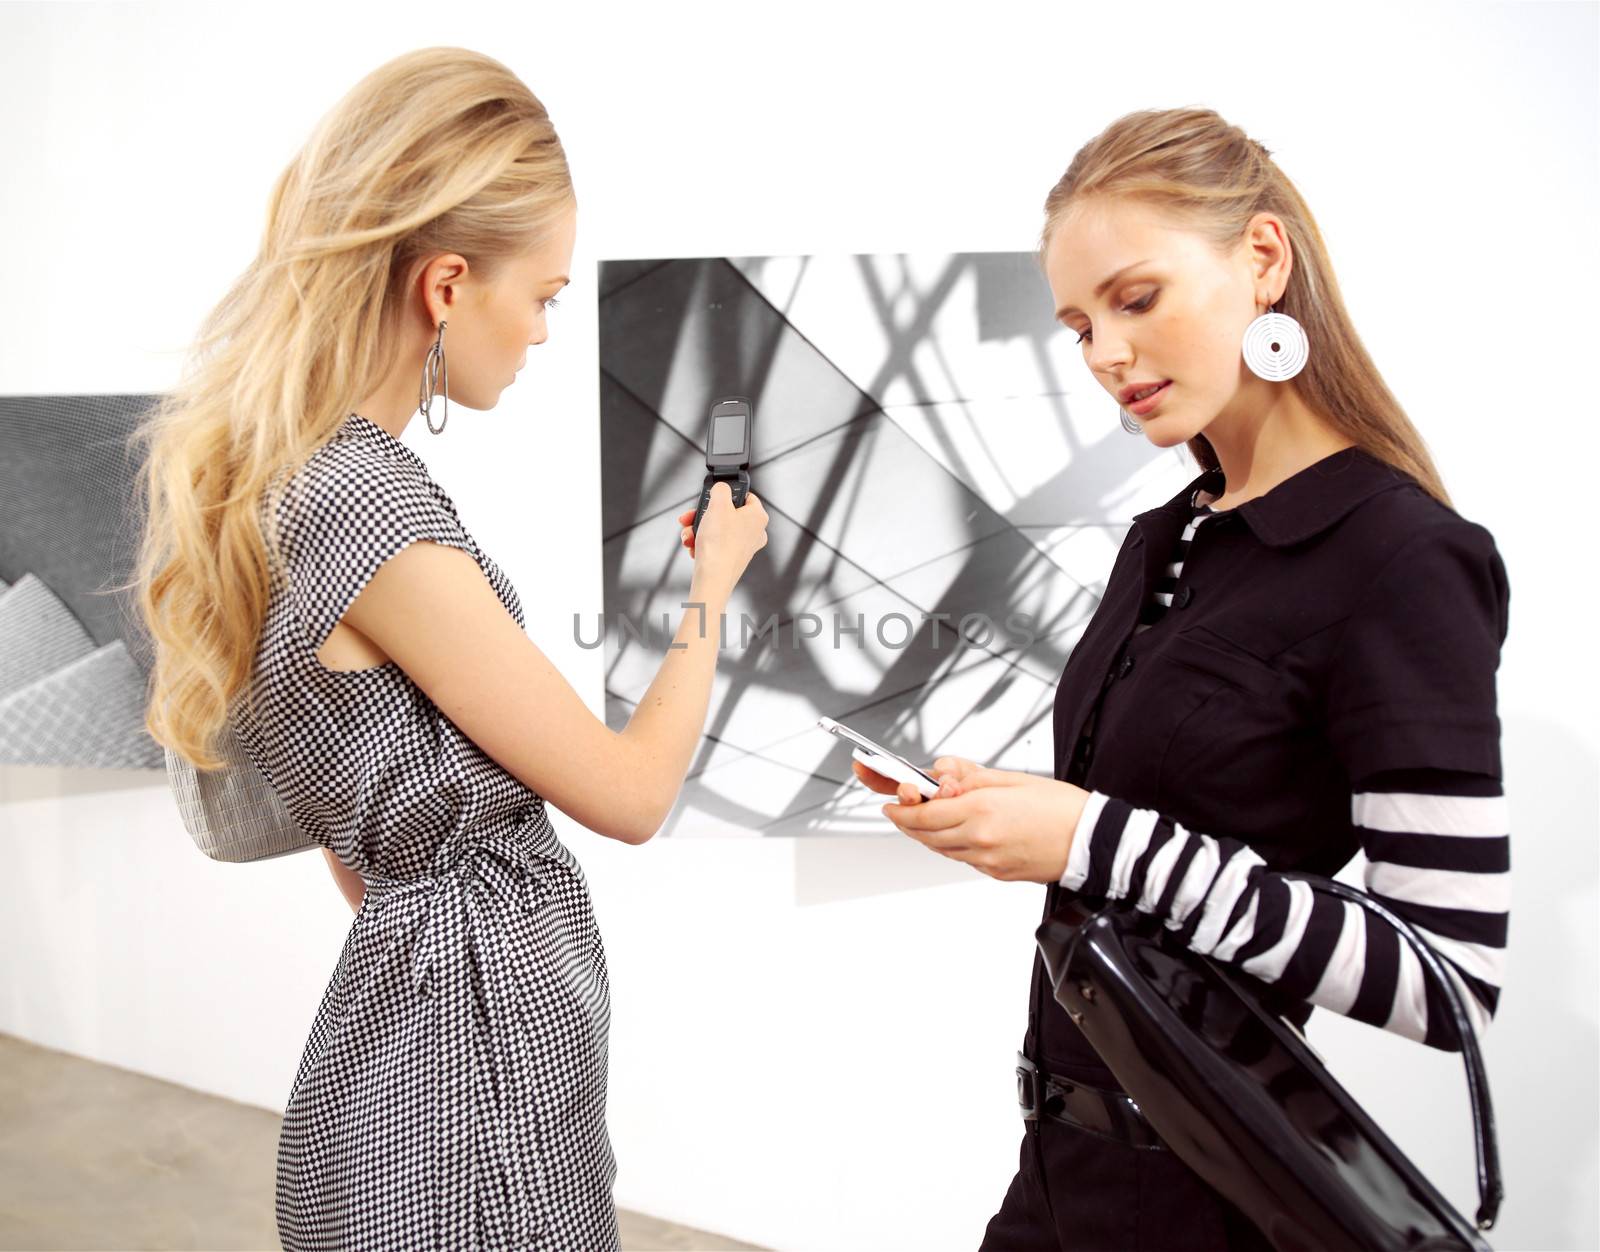 girl-friend with mobile phones at an exhibition 